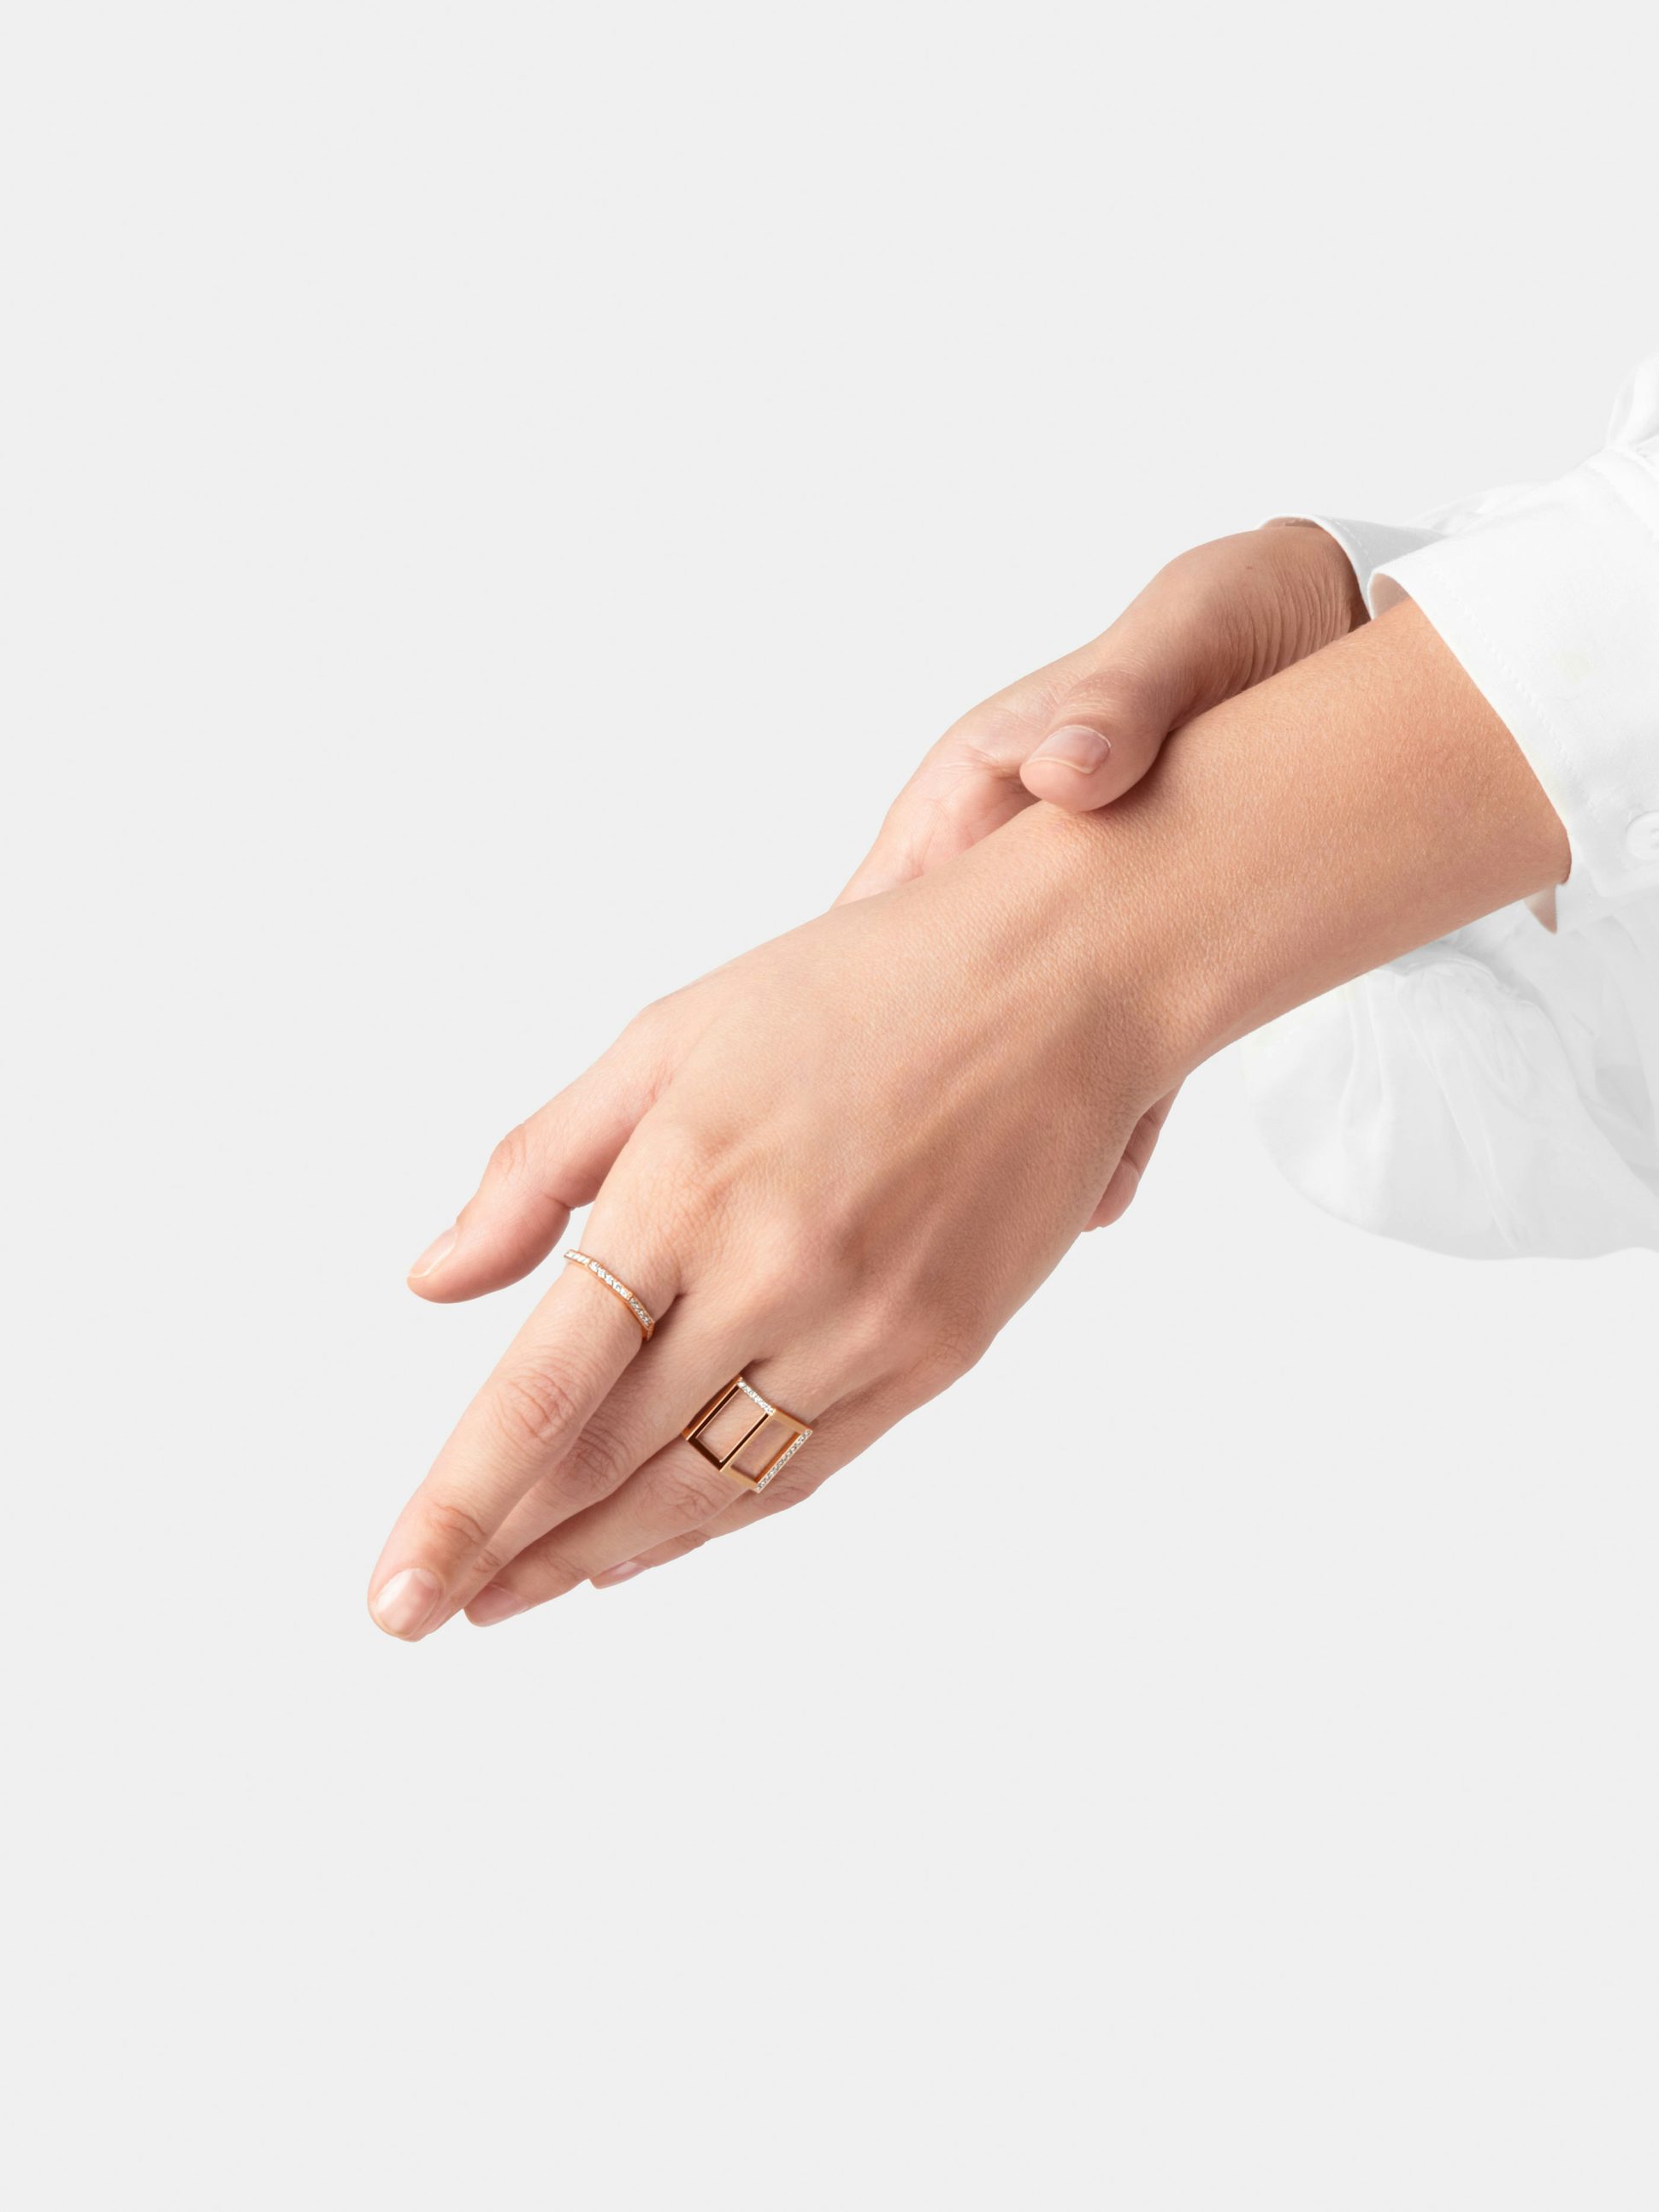 Octogone simple ring in 18k Fairmined ethical rose gold and paved with lab-grown diamonds